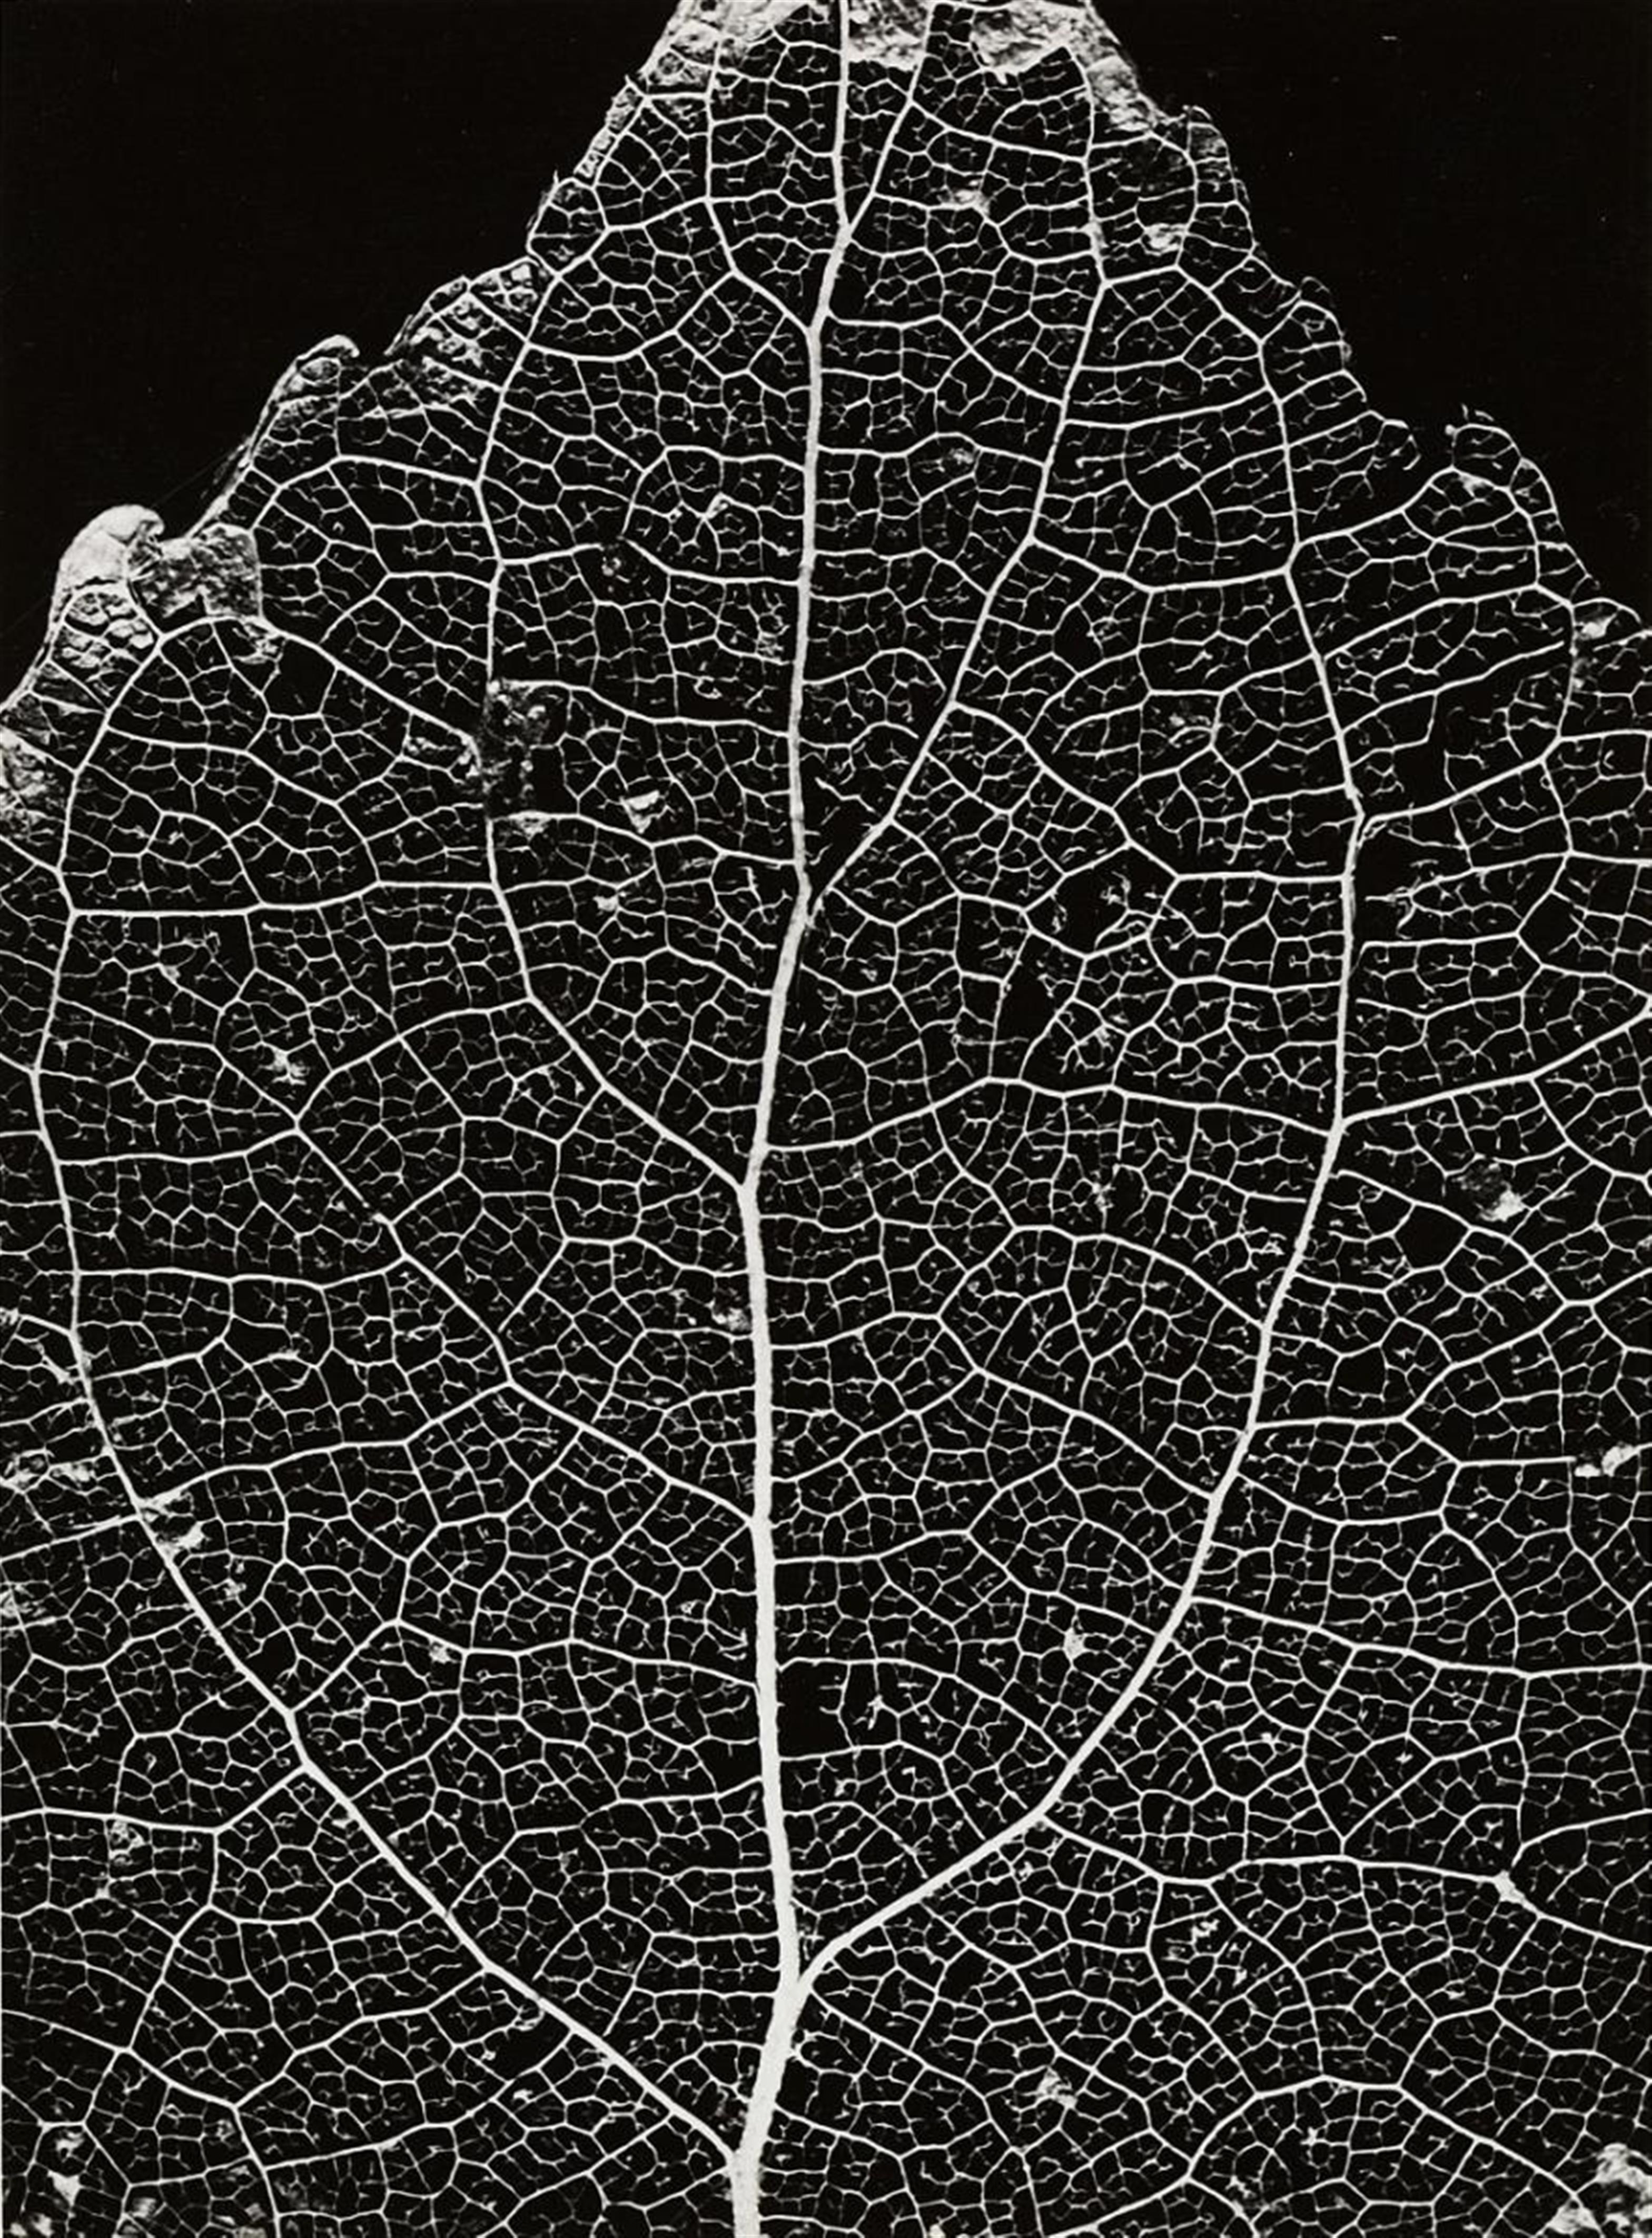 Alfred Ehrhardt - STRUCTURE OF A LIME TREE LEAF - image-1